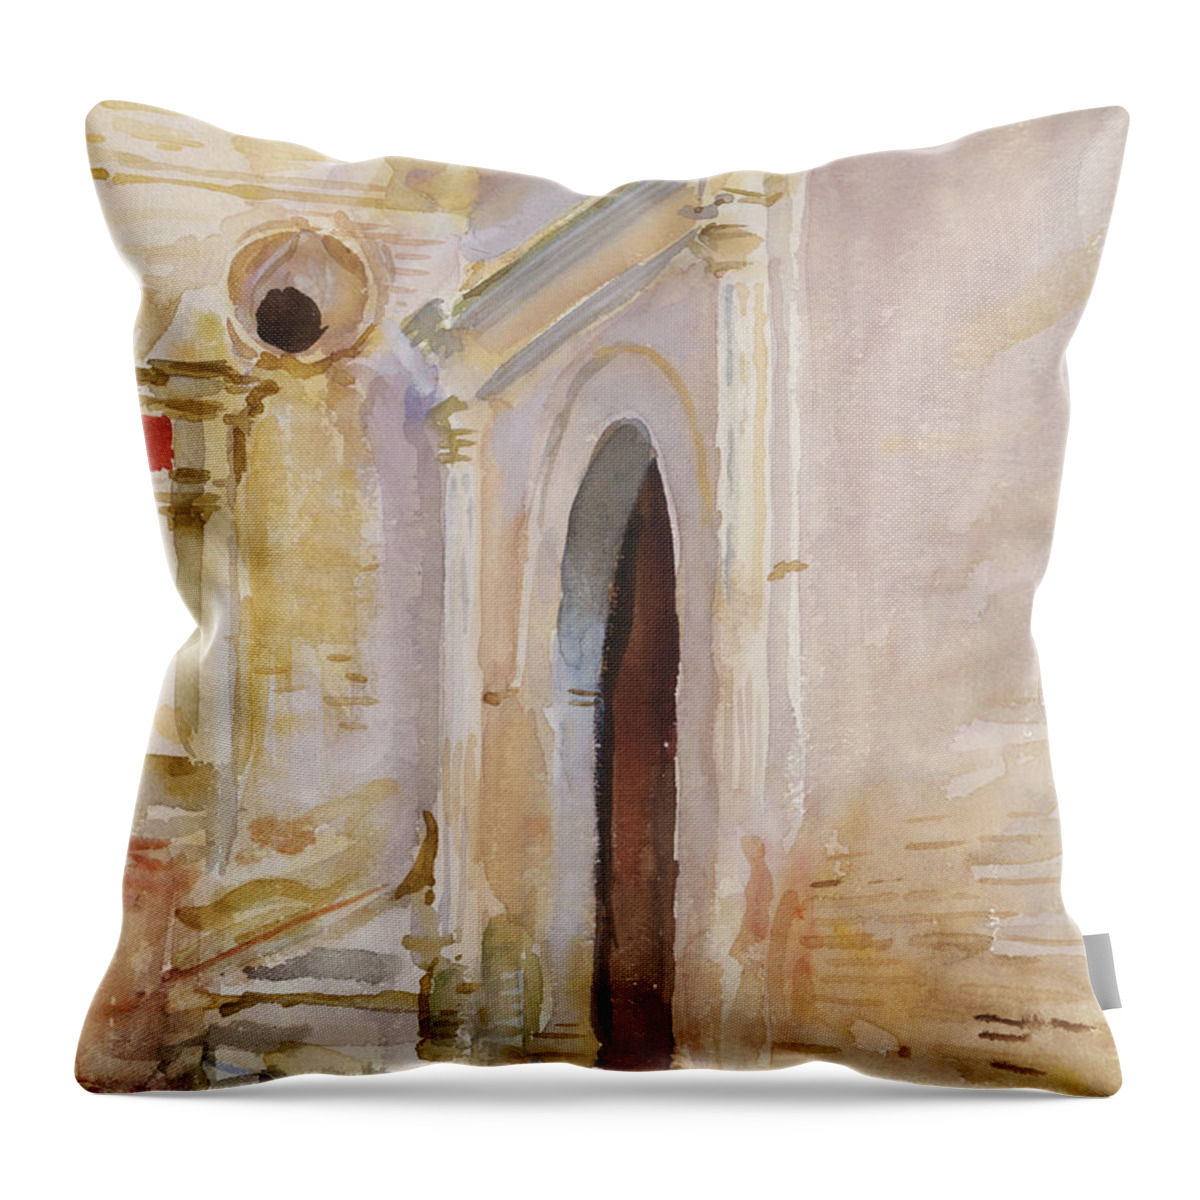 Architecture Throw Pillow featuring the painting Arched Doorway #3 by John Singer Sargent